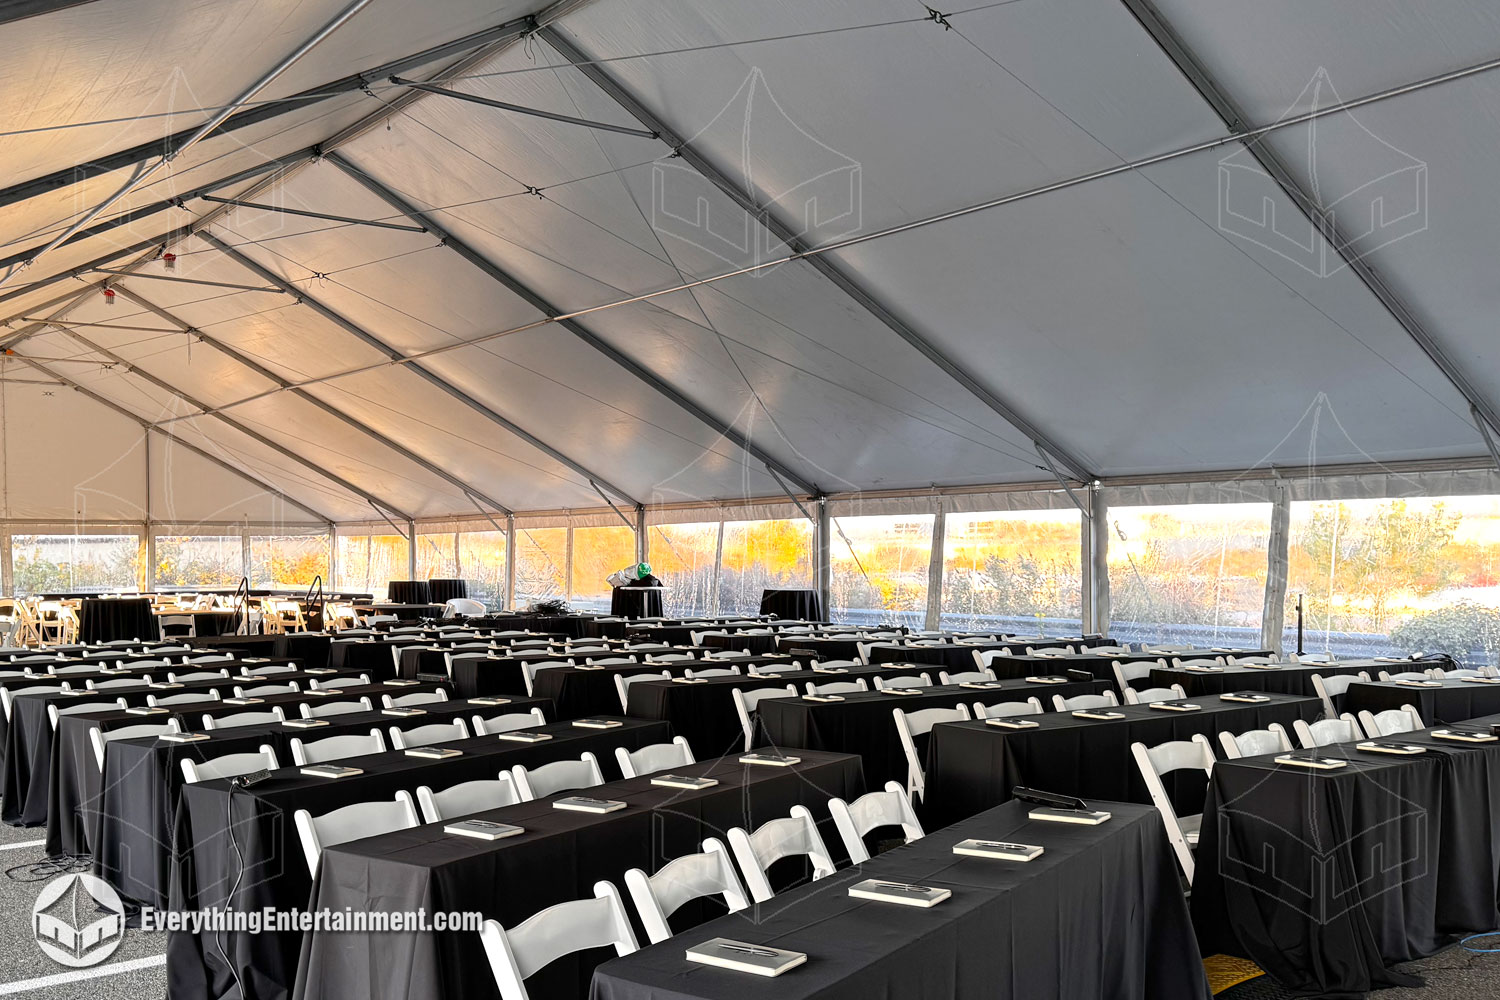 huge clear top tent with 1000 seats and stage